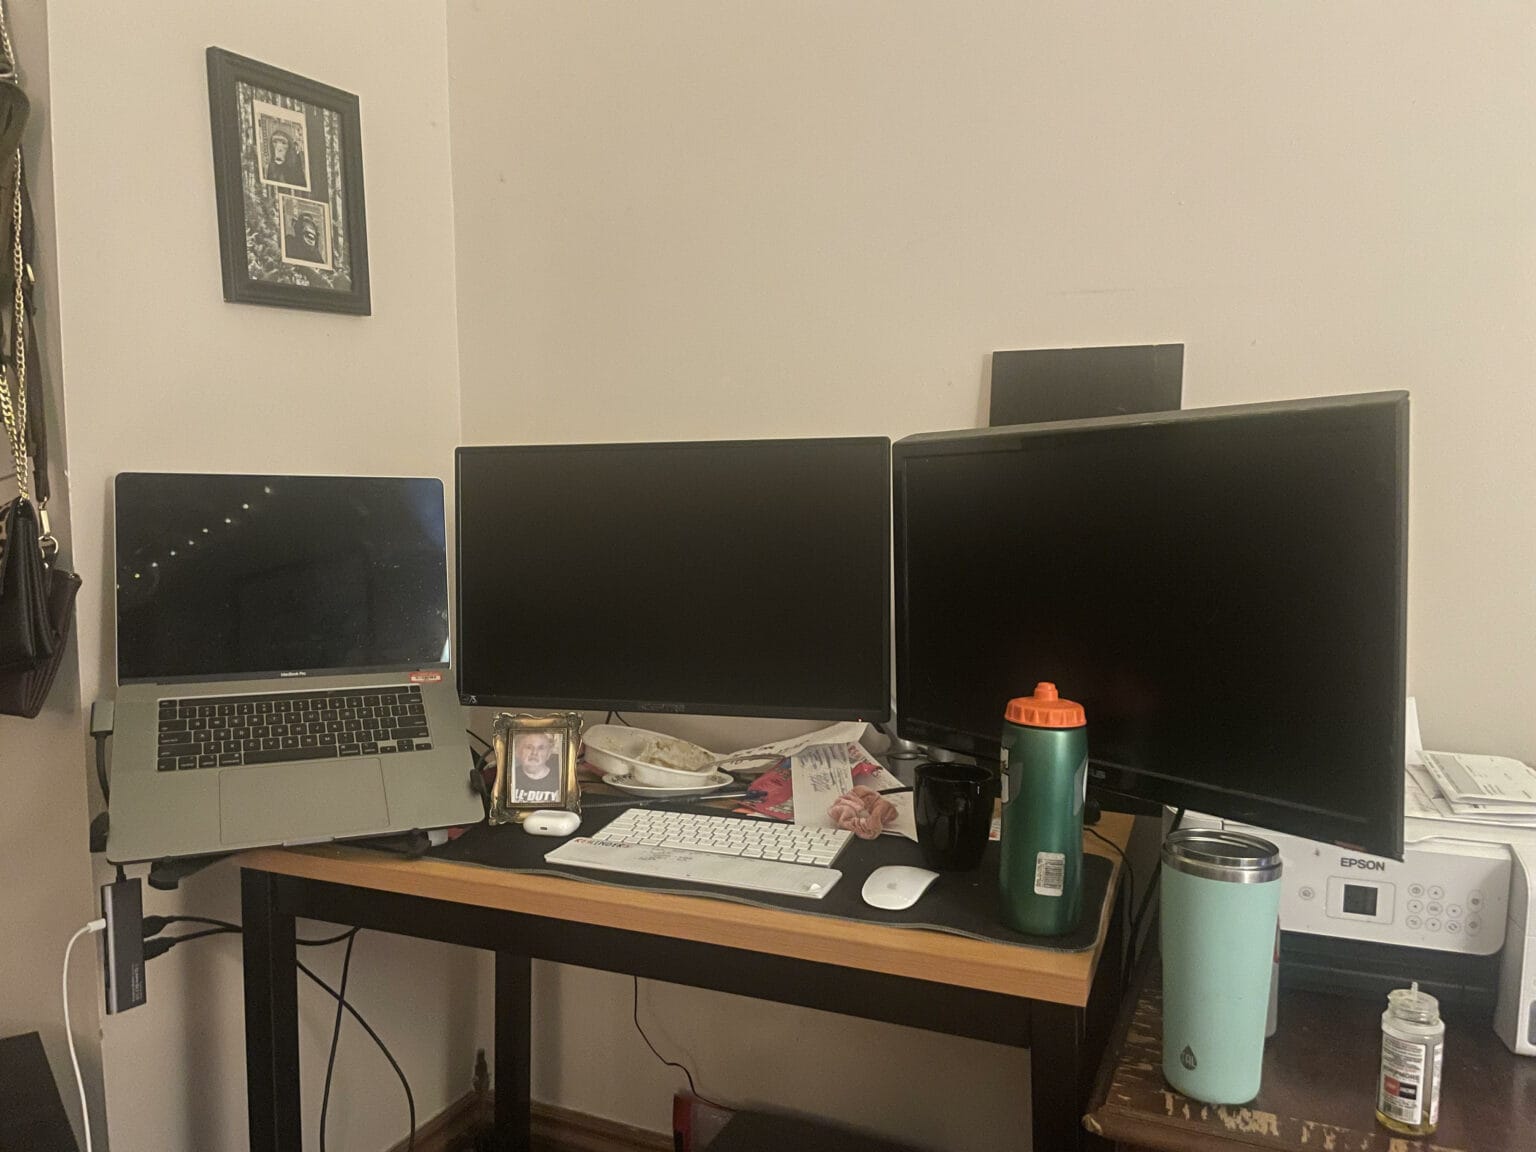 If you count the MacBook Pro, it's a triple-display workstation.